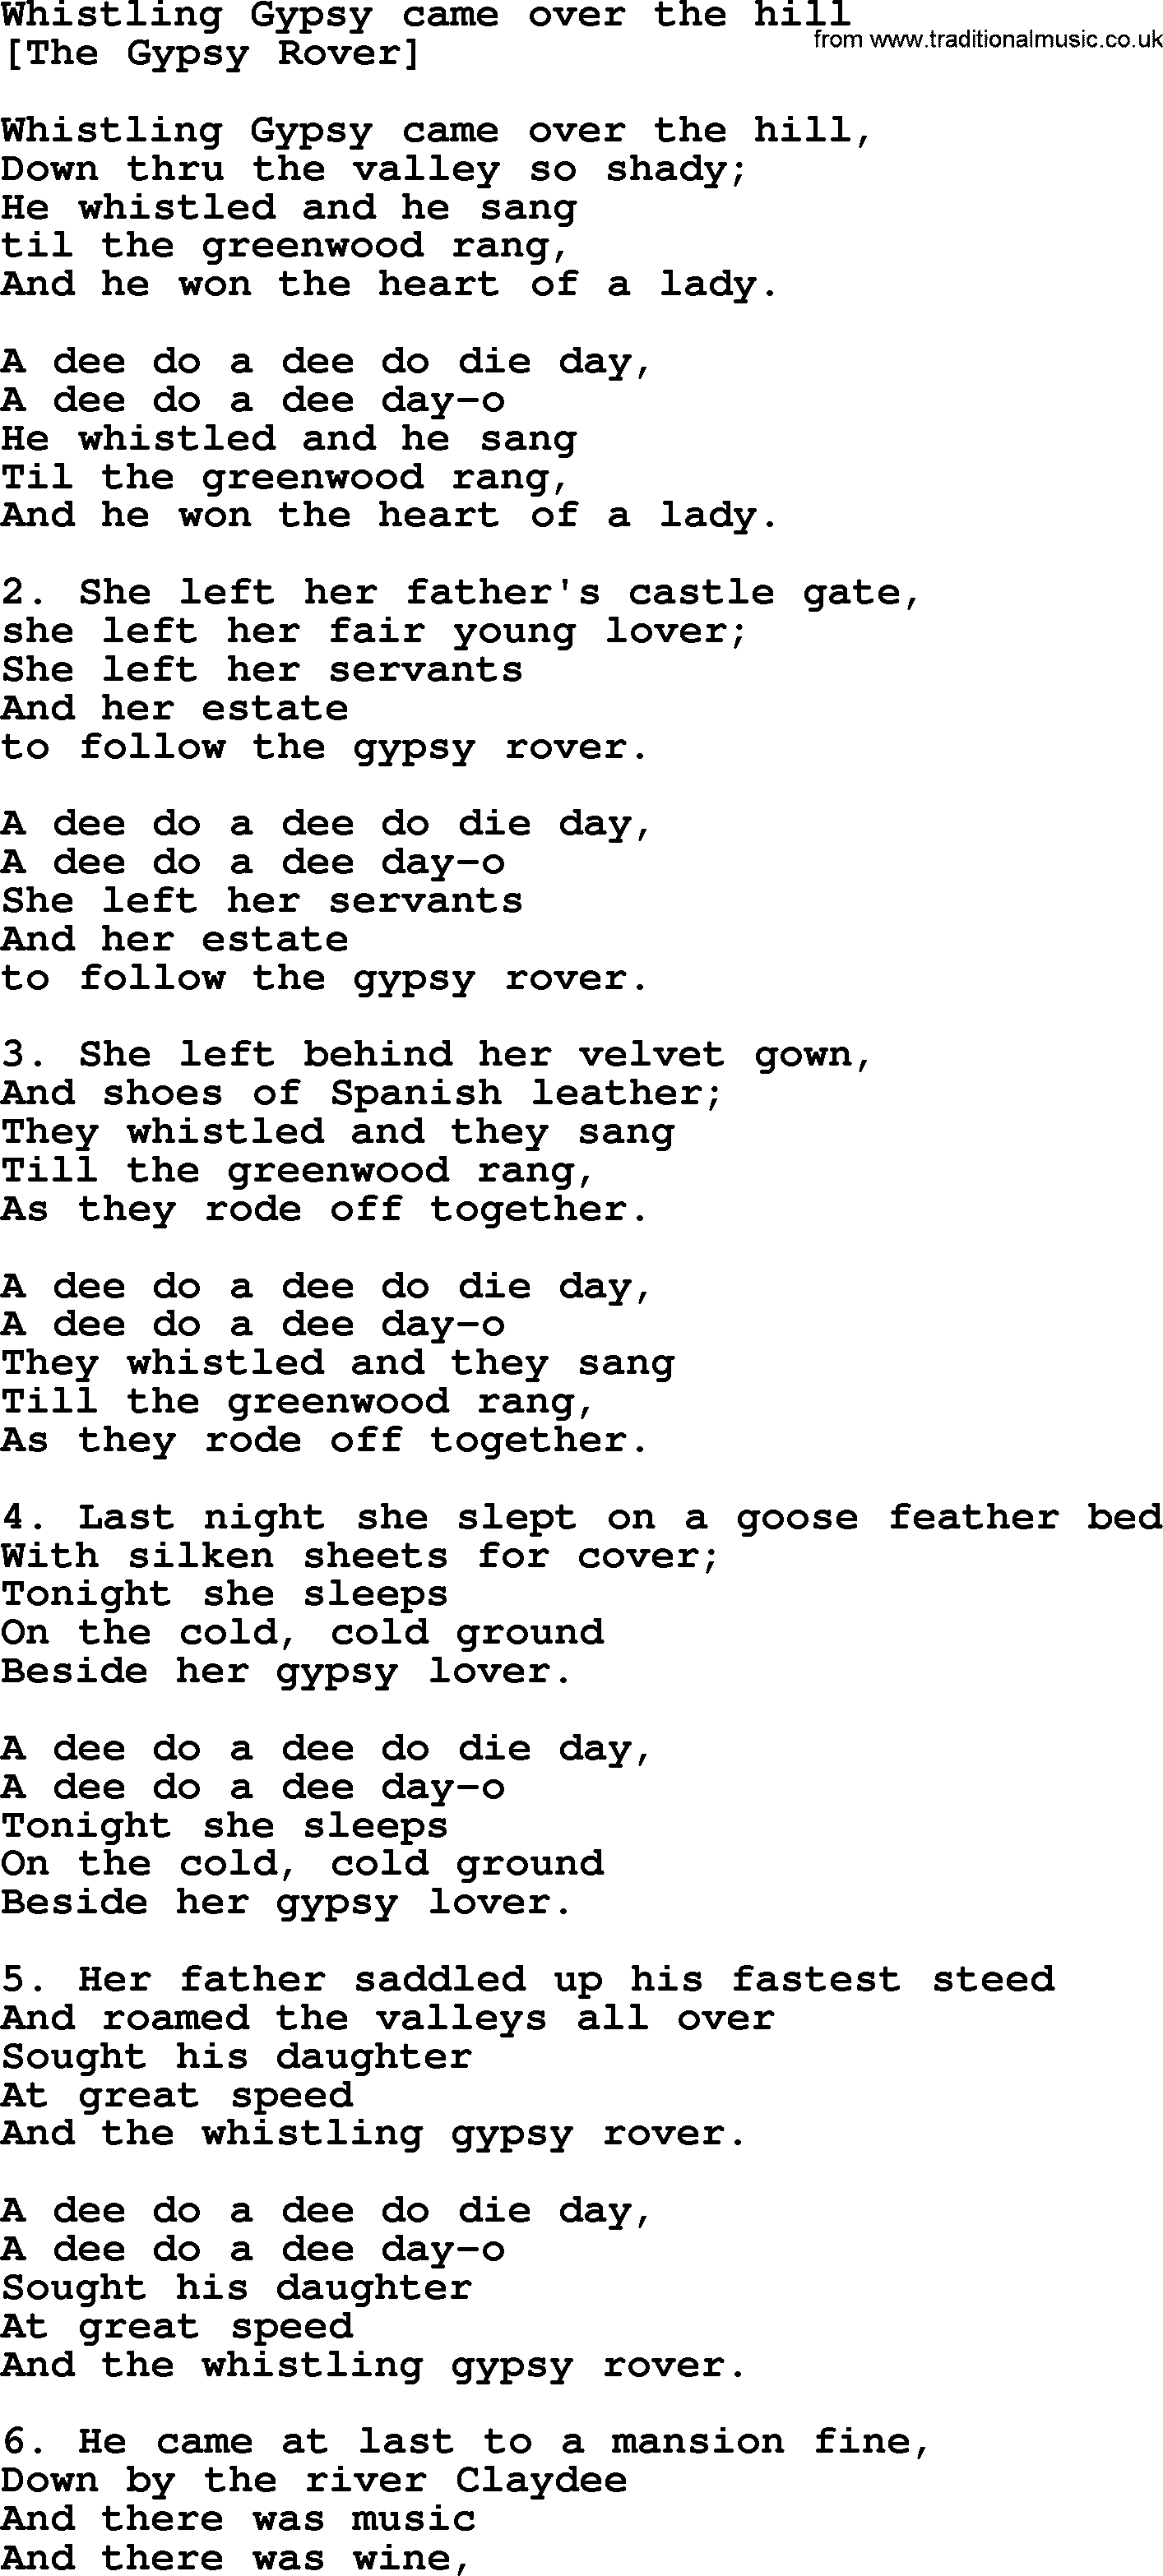 Old English Song: Whistling Gypsy Came Over The Hill lyrics